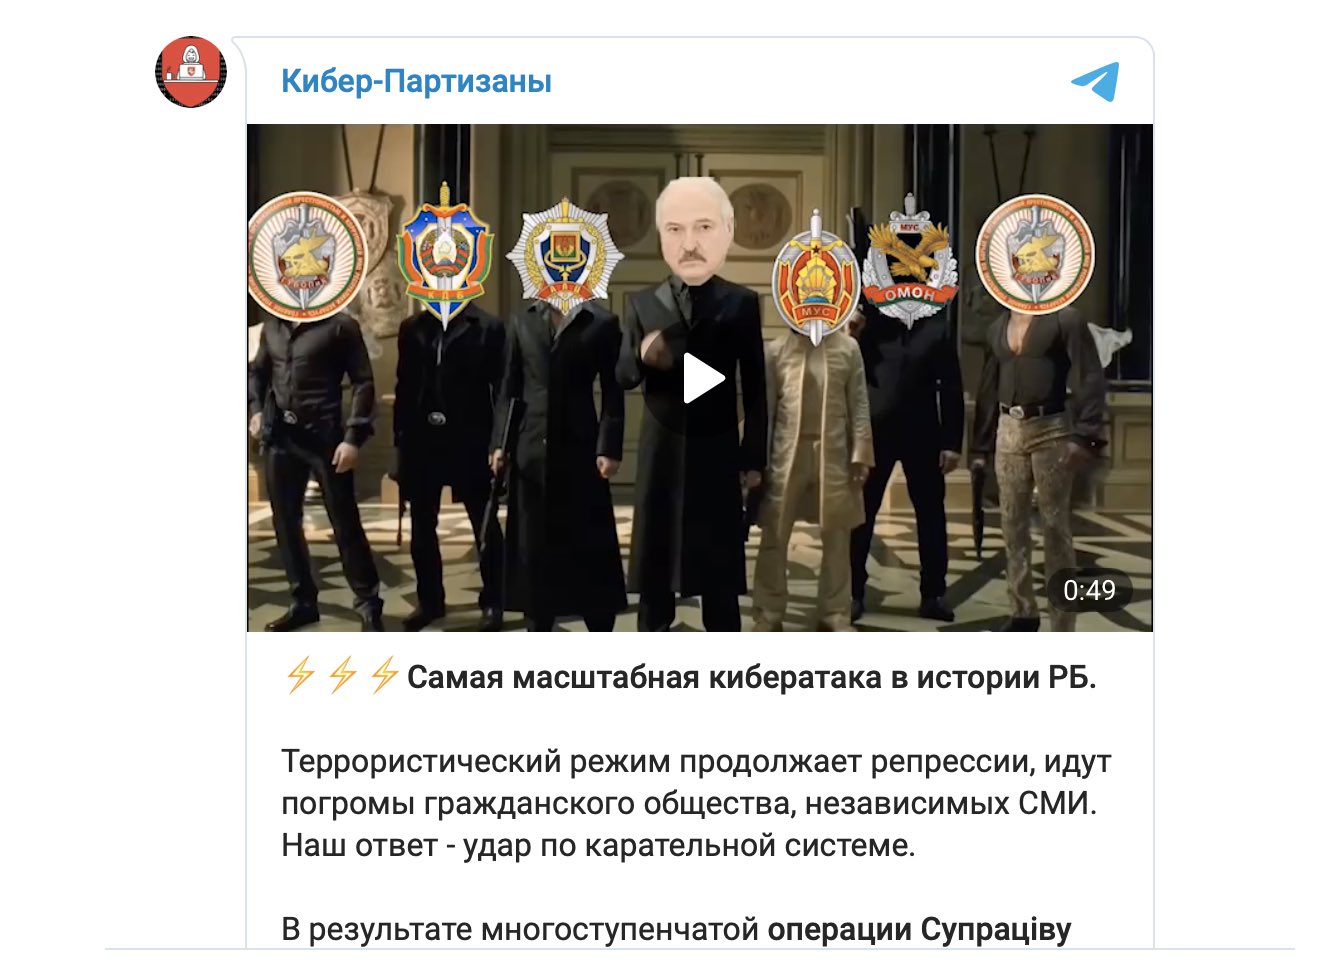 Image: Telegram post by Cyber Partisans claiming to have launched “the largest-scale cyberattack in the history of the Republic of Belarus,” stating that the attack was a strike at the “terrorist regime” in response to its continued repression against civil society and the independent media.